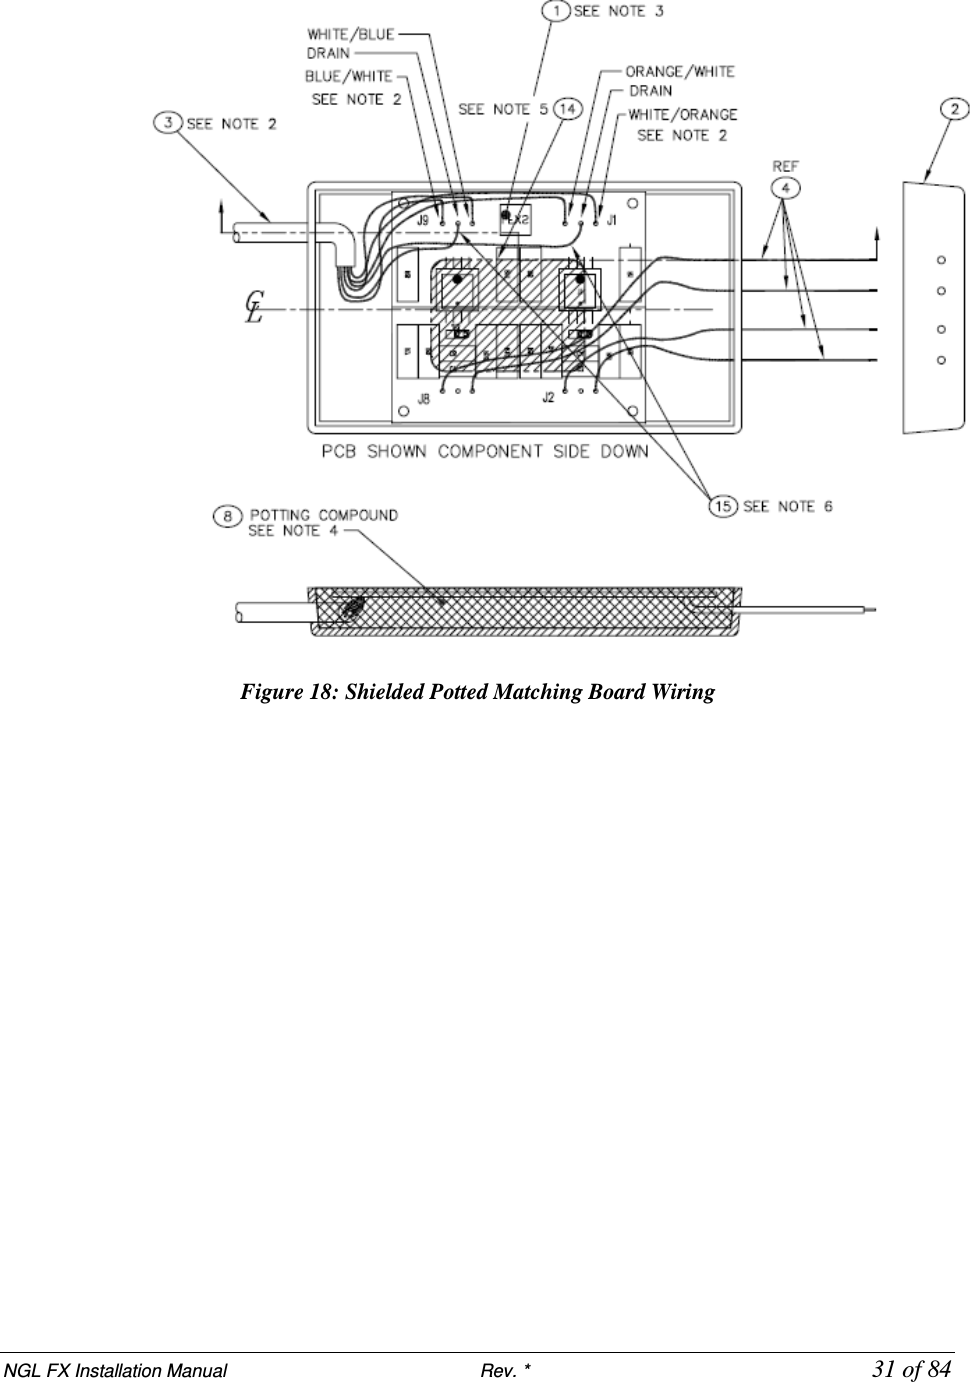 NGL FX Installation Manual                           Rev. *            31 of 84   Figure 18: Shielded Potted Matching Board Wiring 